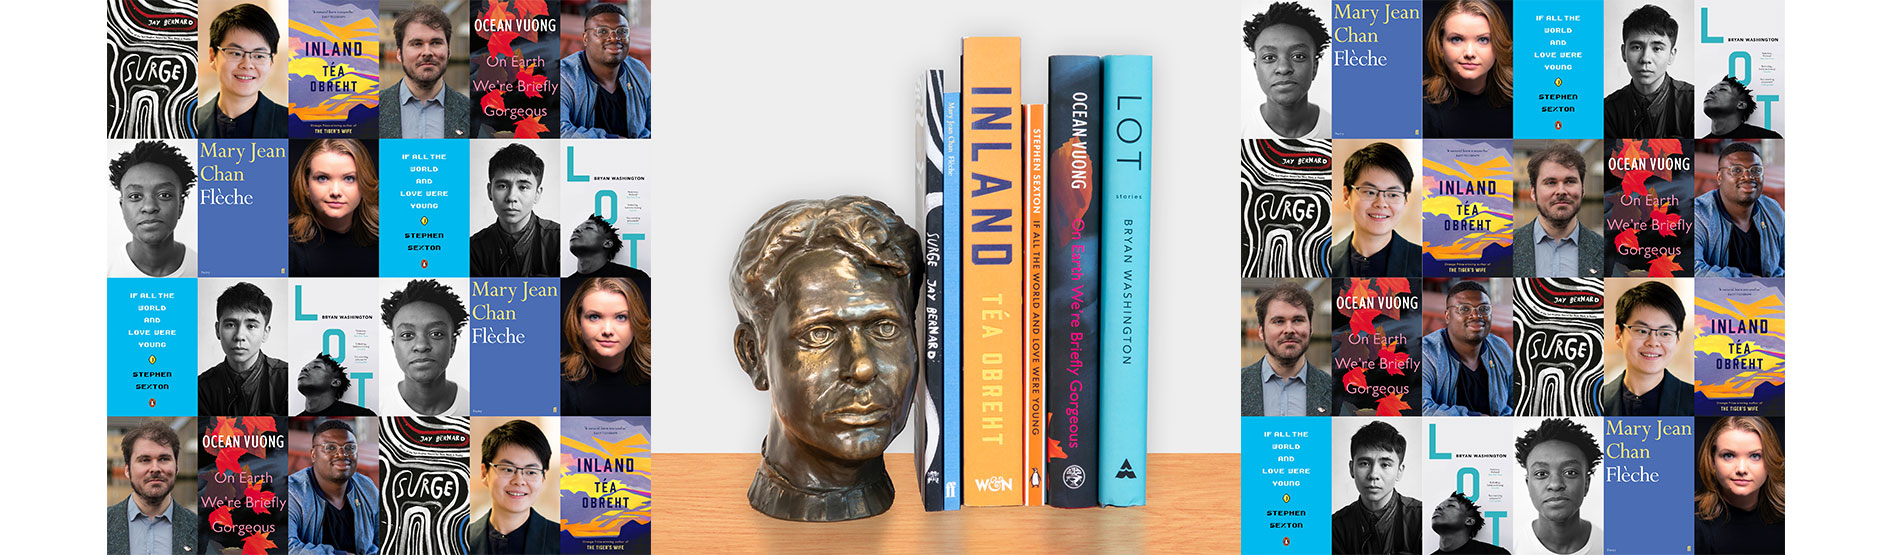 Swansea University Dylan Thomas Prize 2020 Shortlist Book Review Competition Goes Global!